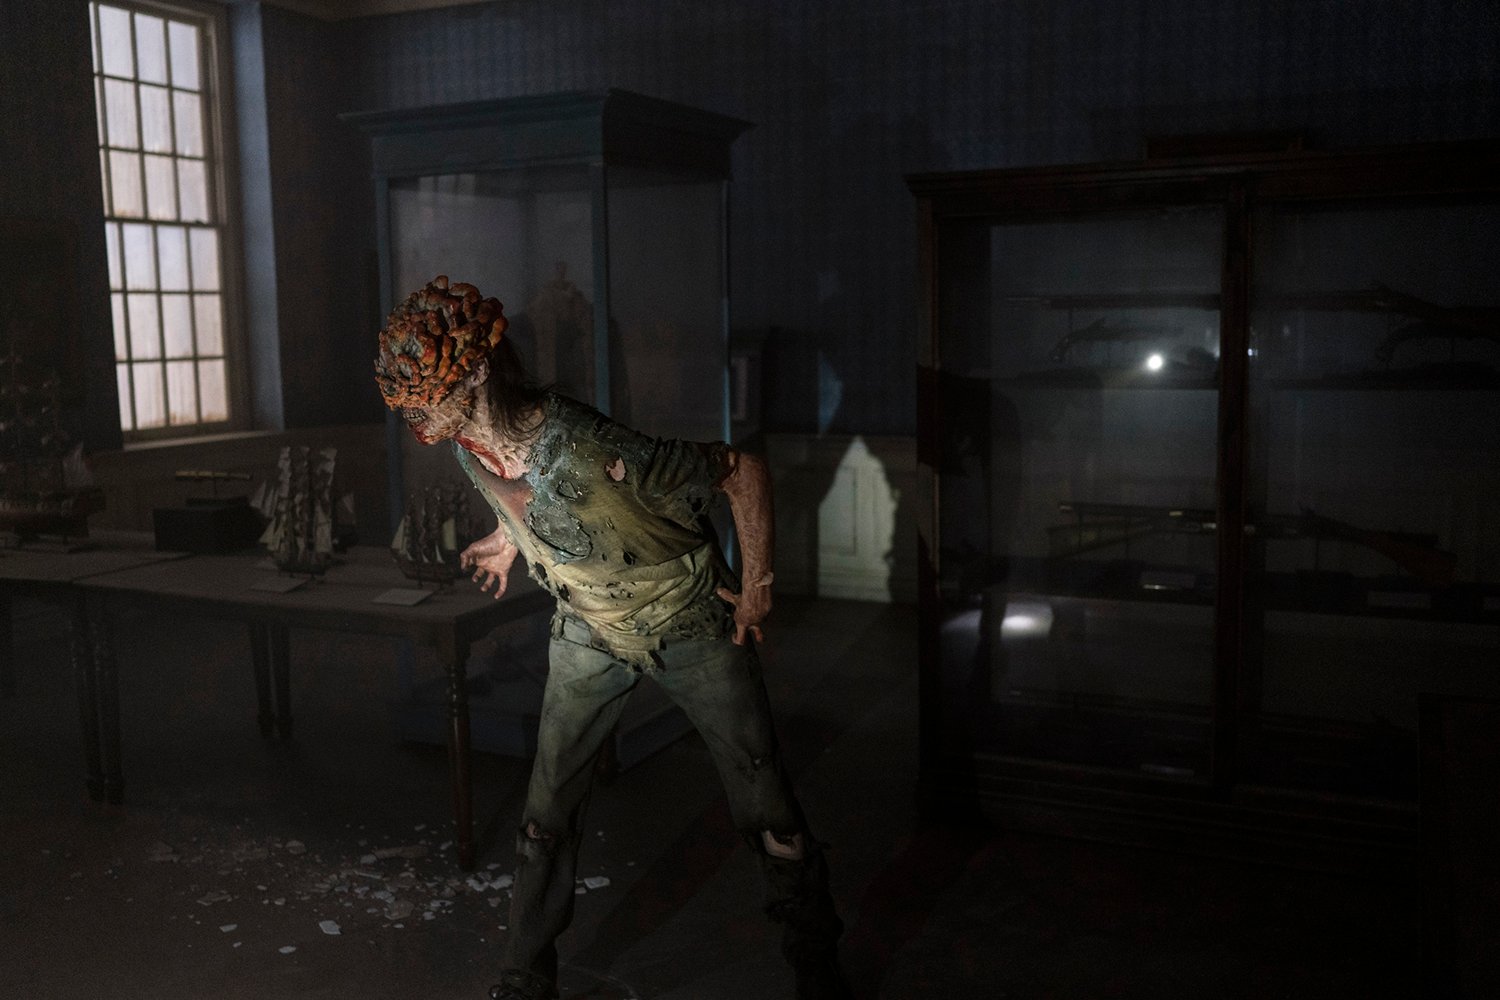 An infected person known as a Clicker roams a dark museum in The Last of Us.